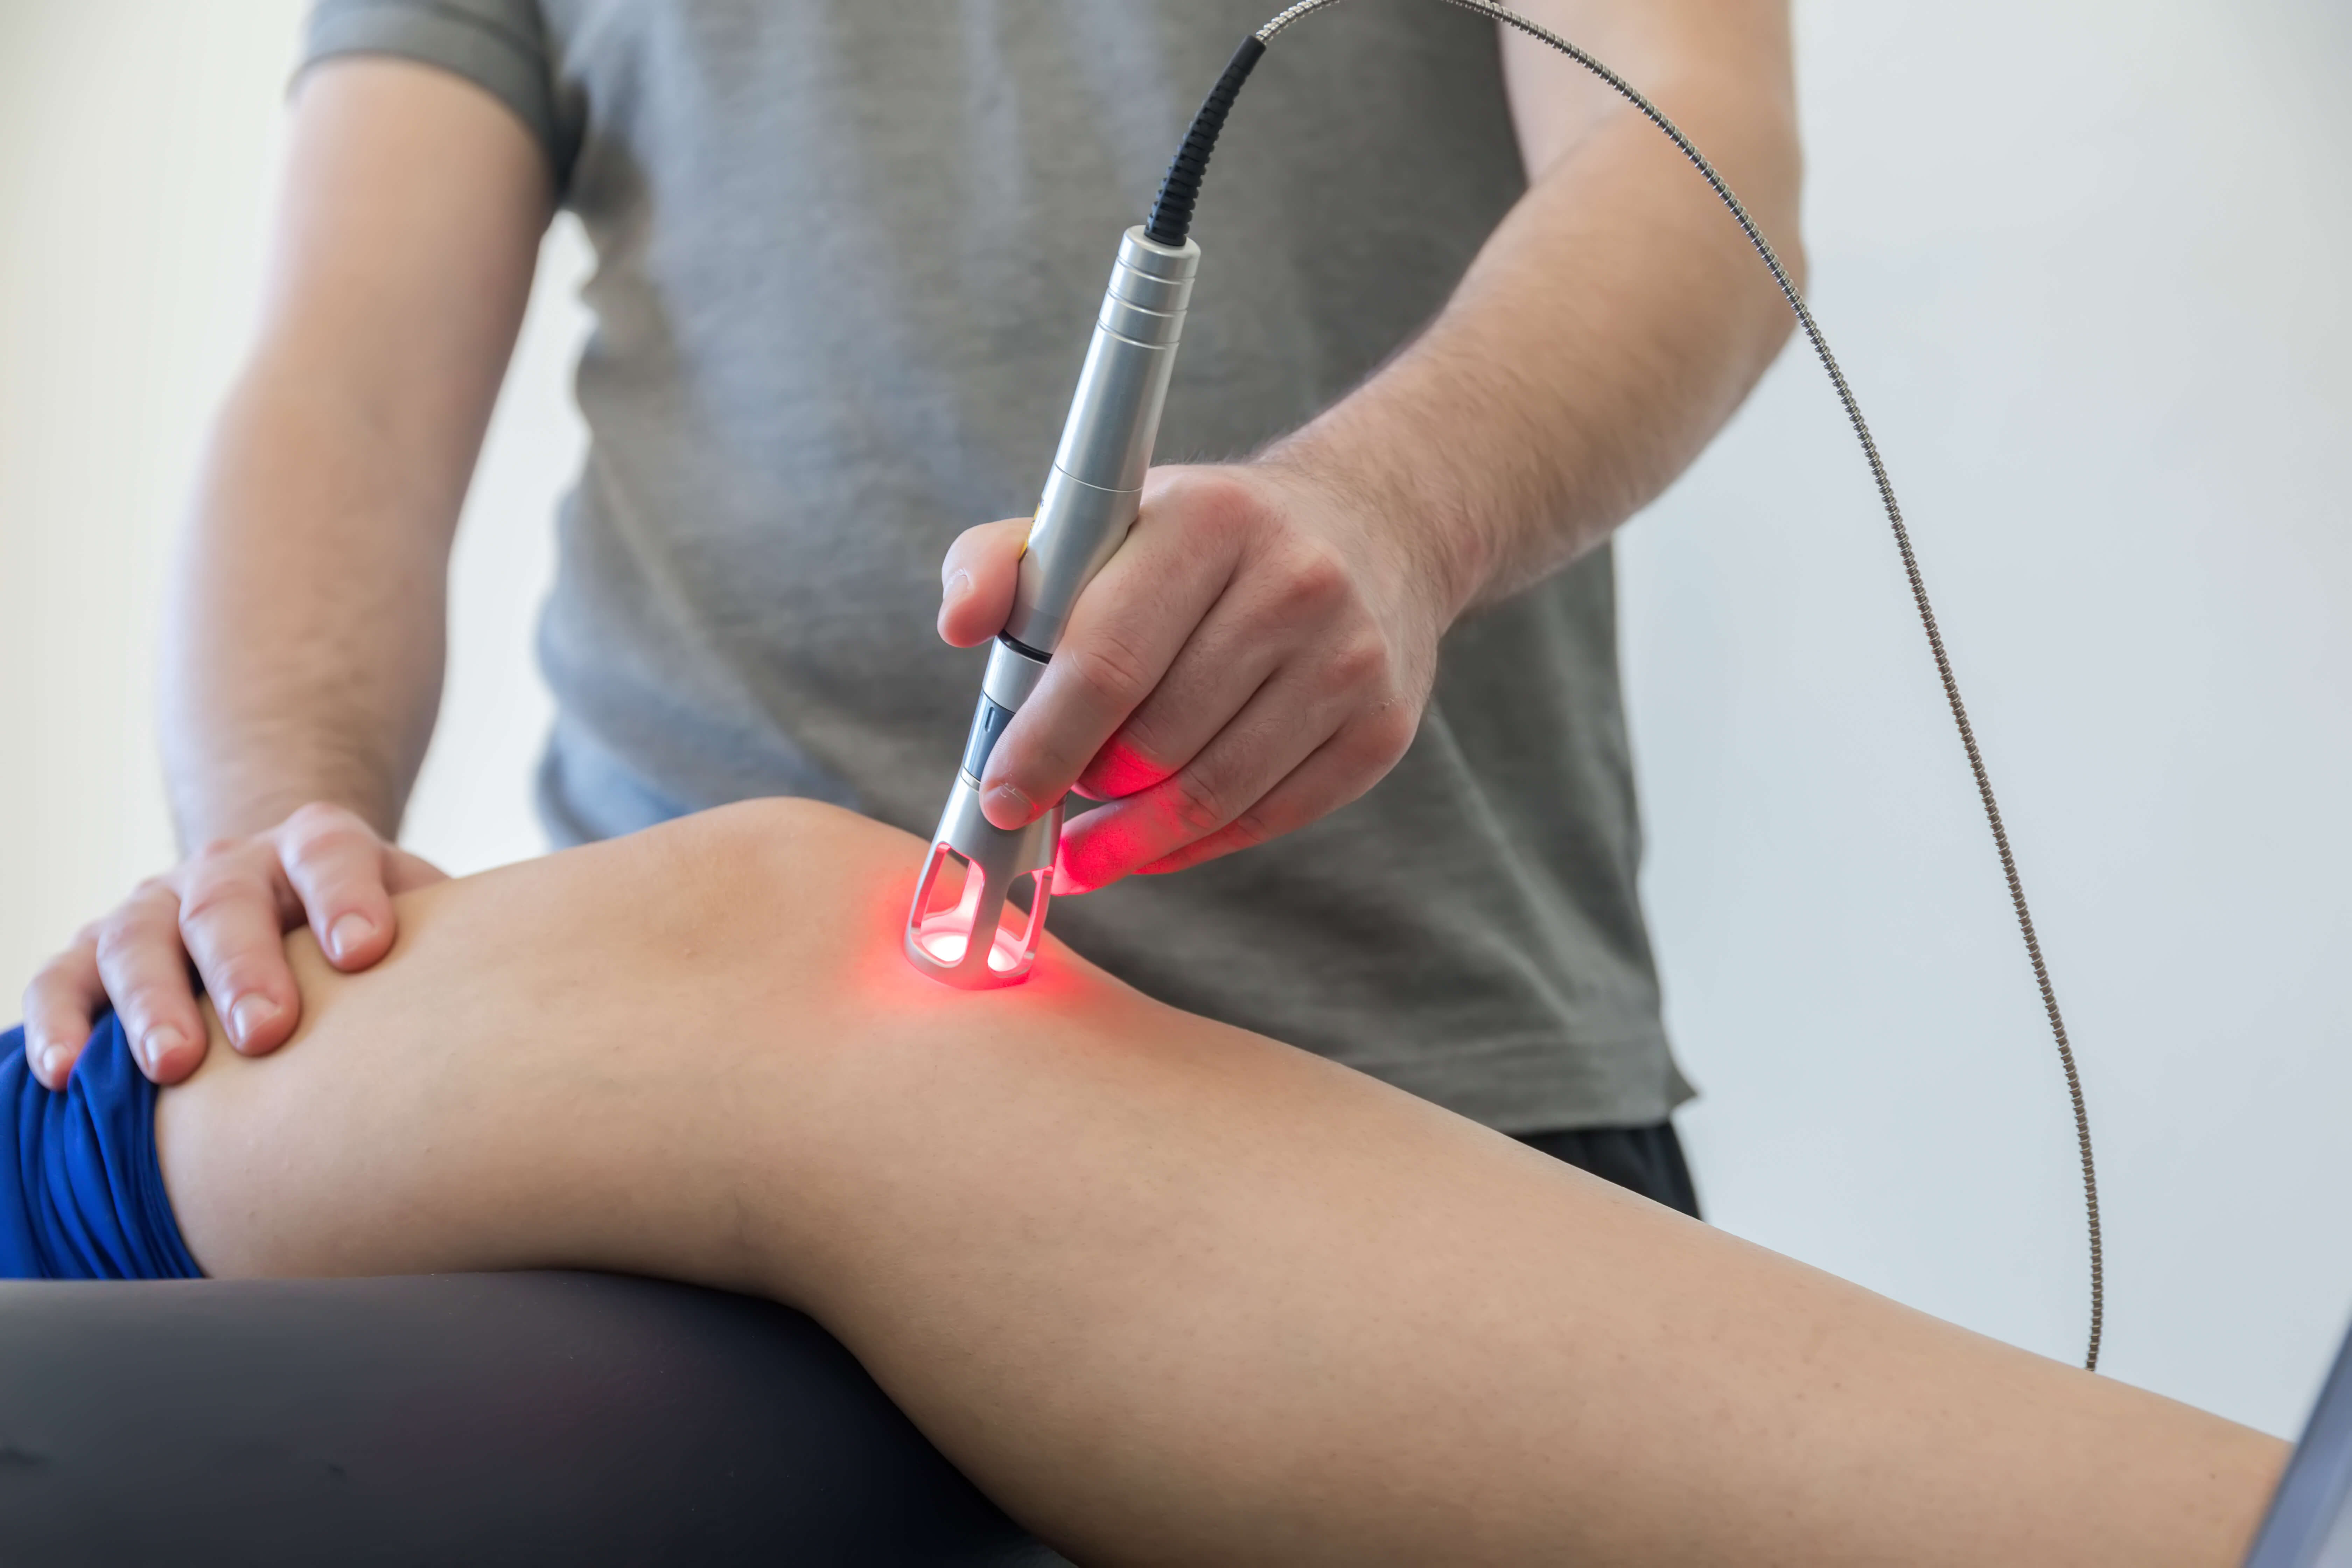 How can physiotherapy help with your knee pain?